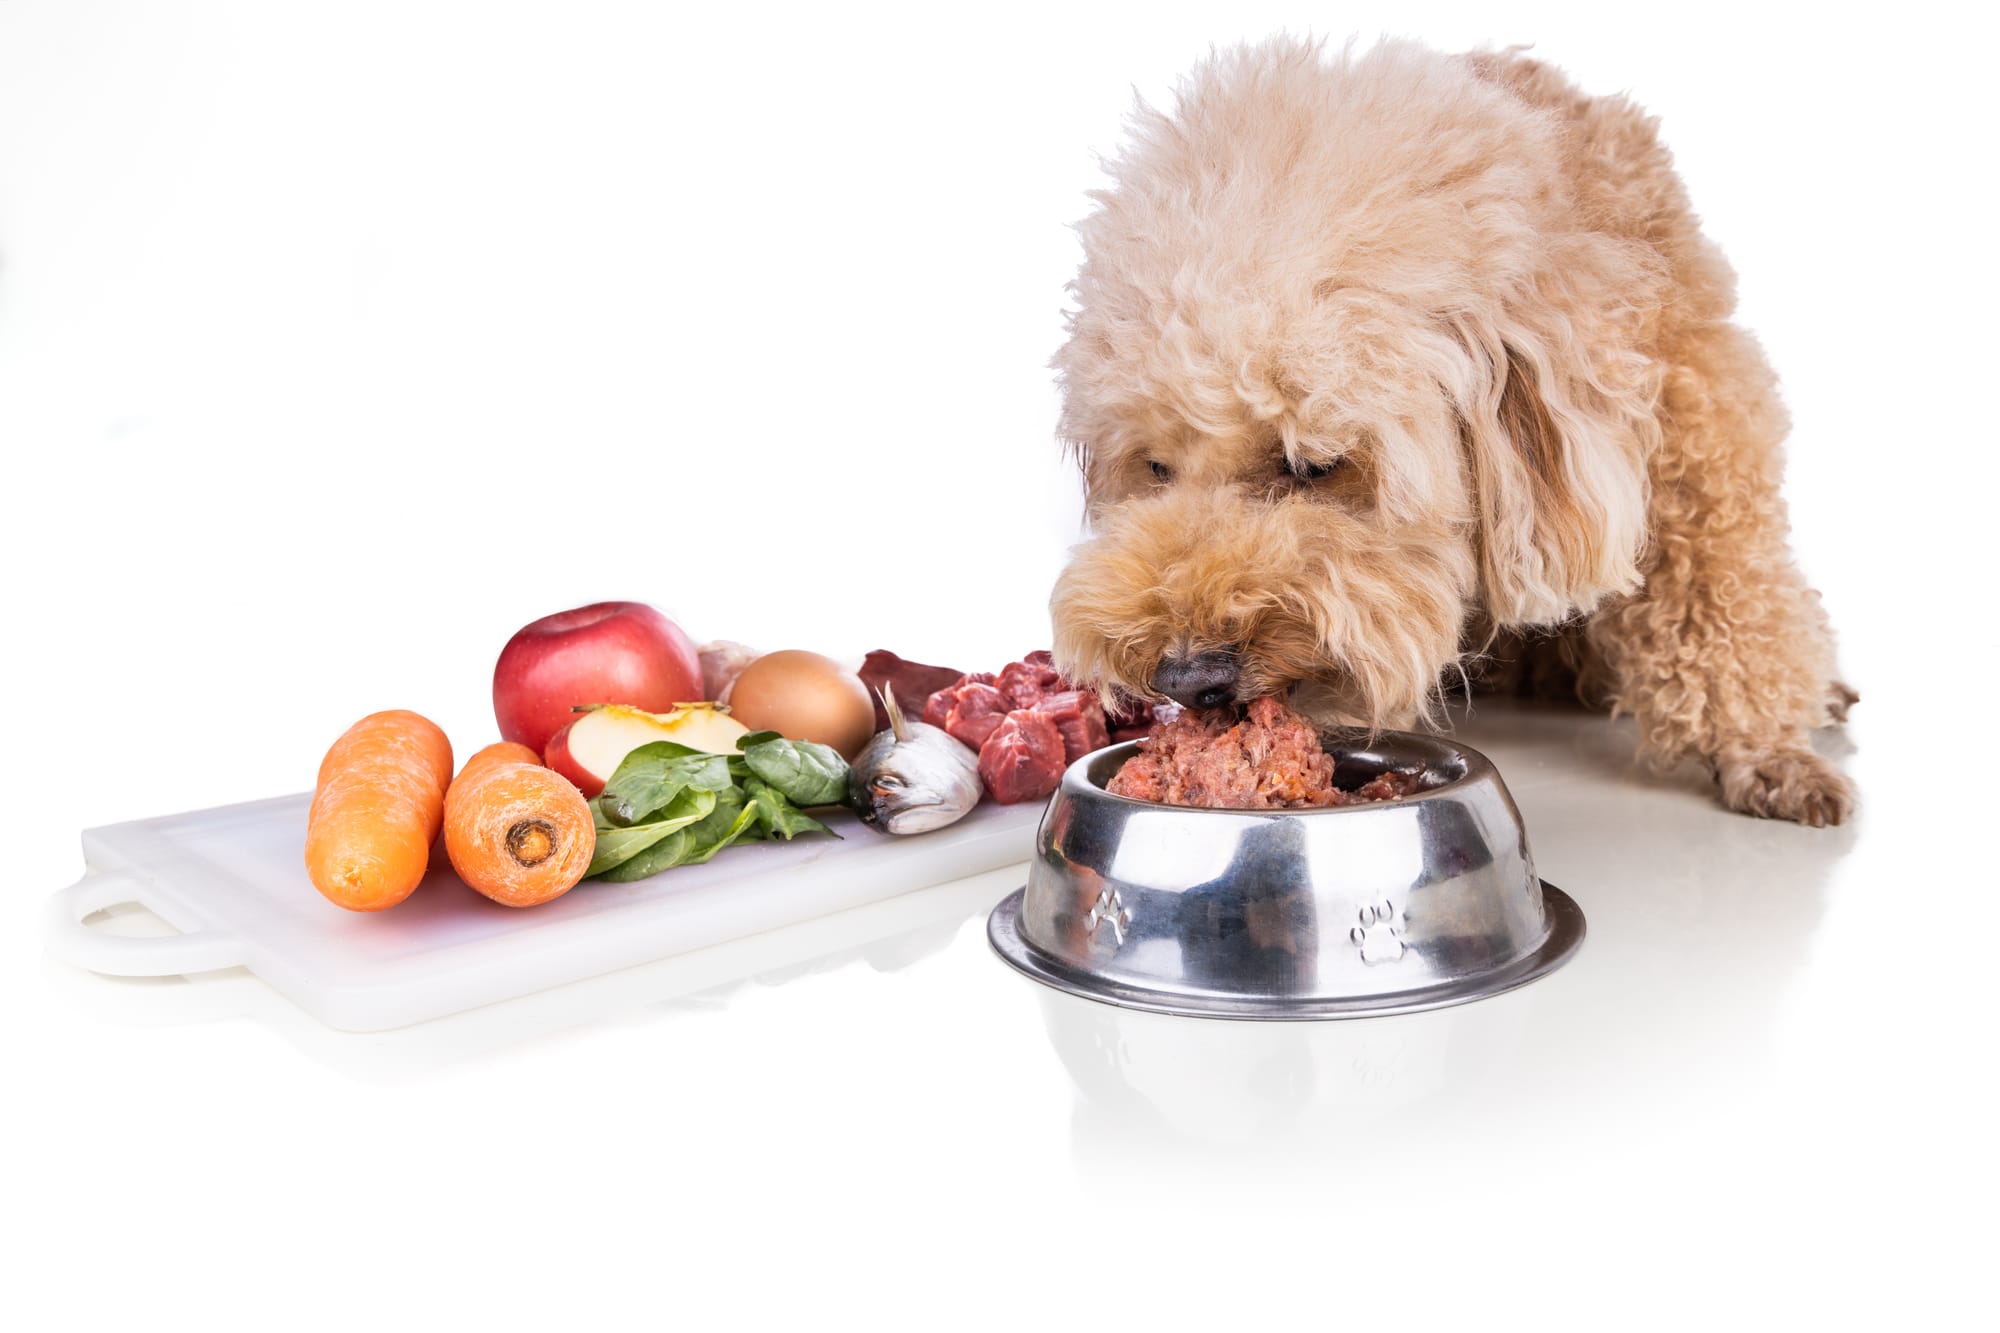 Best Foods for Gassy Dogs